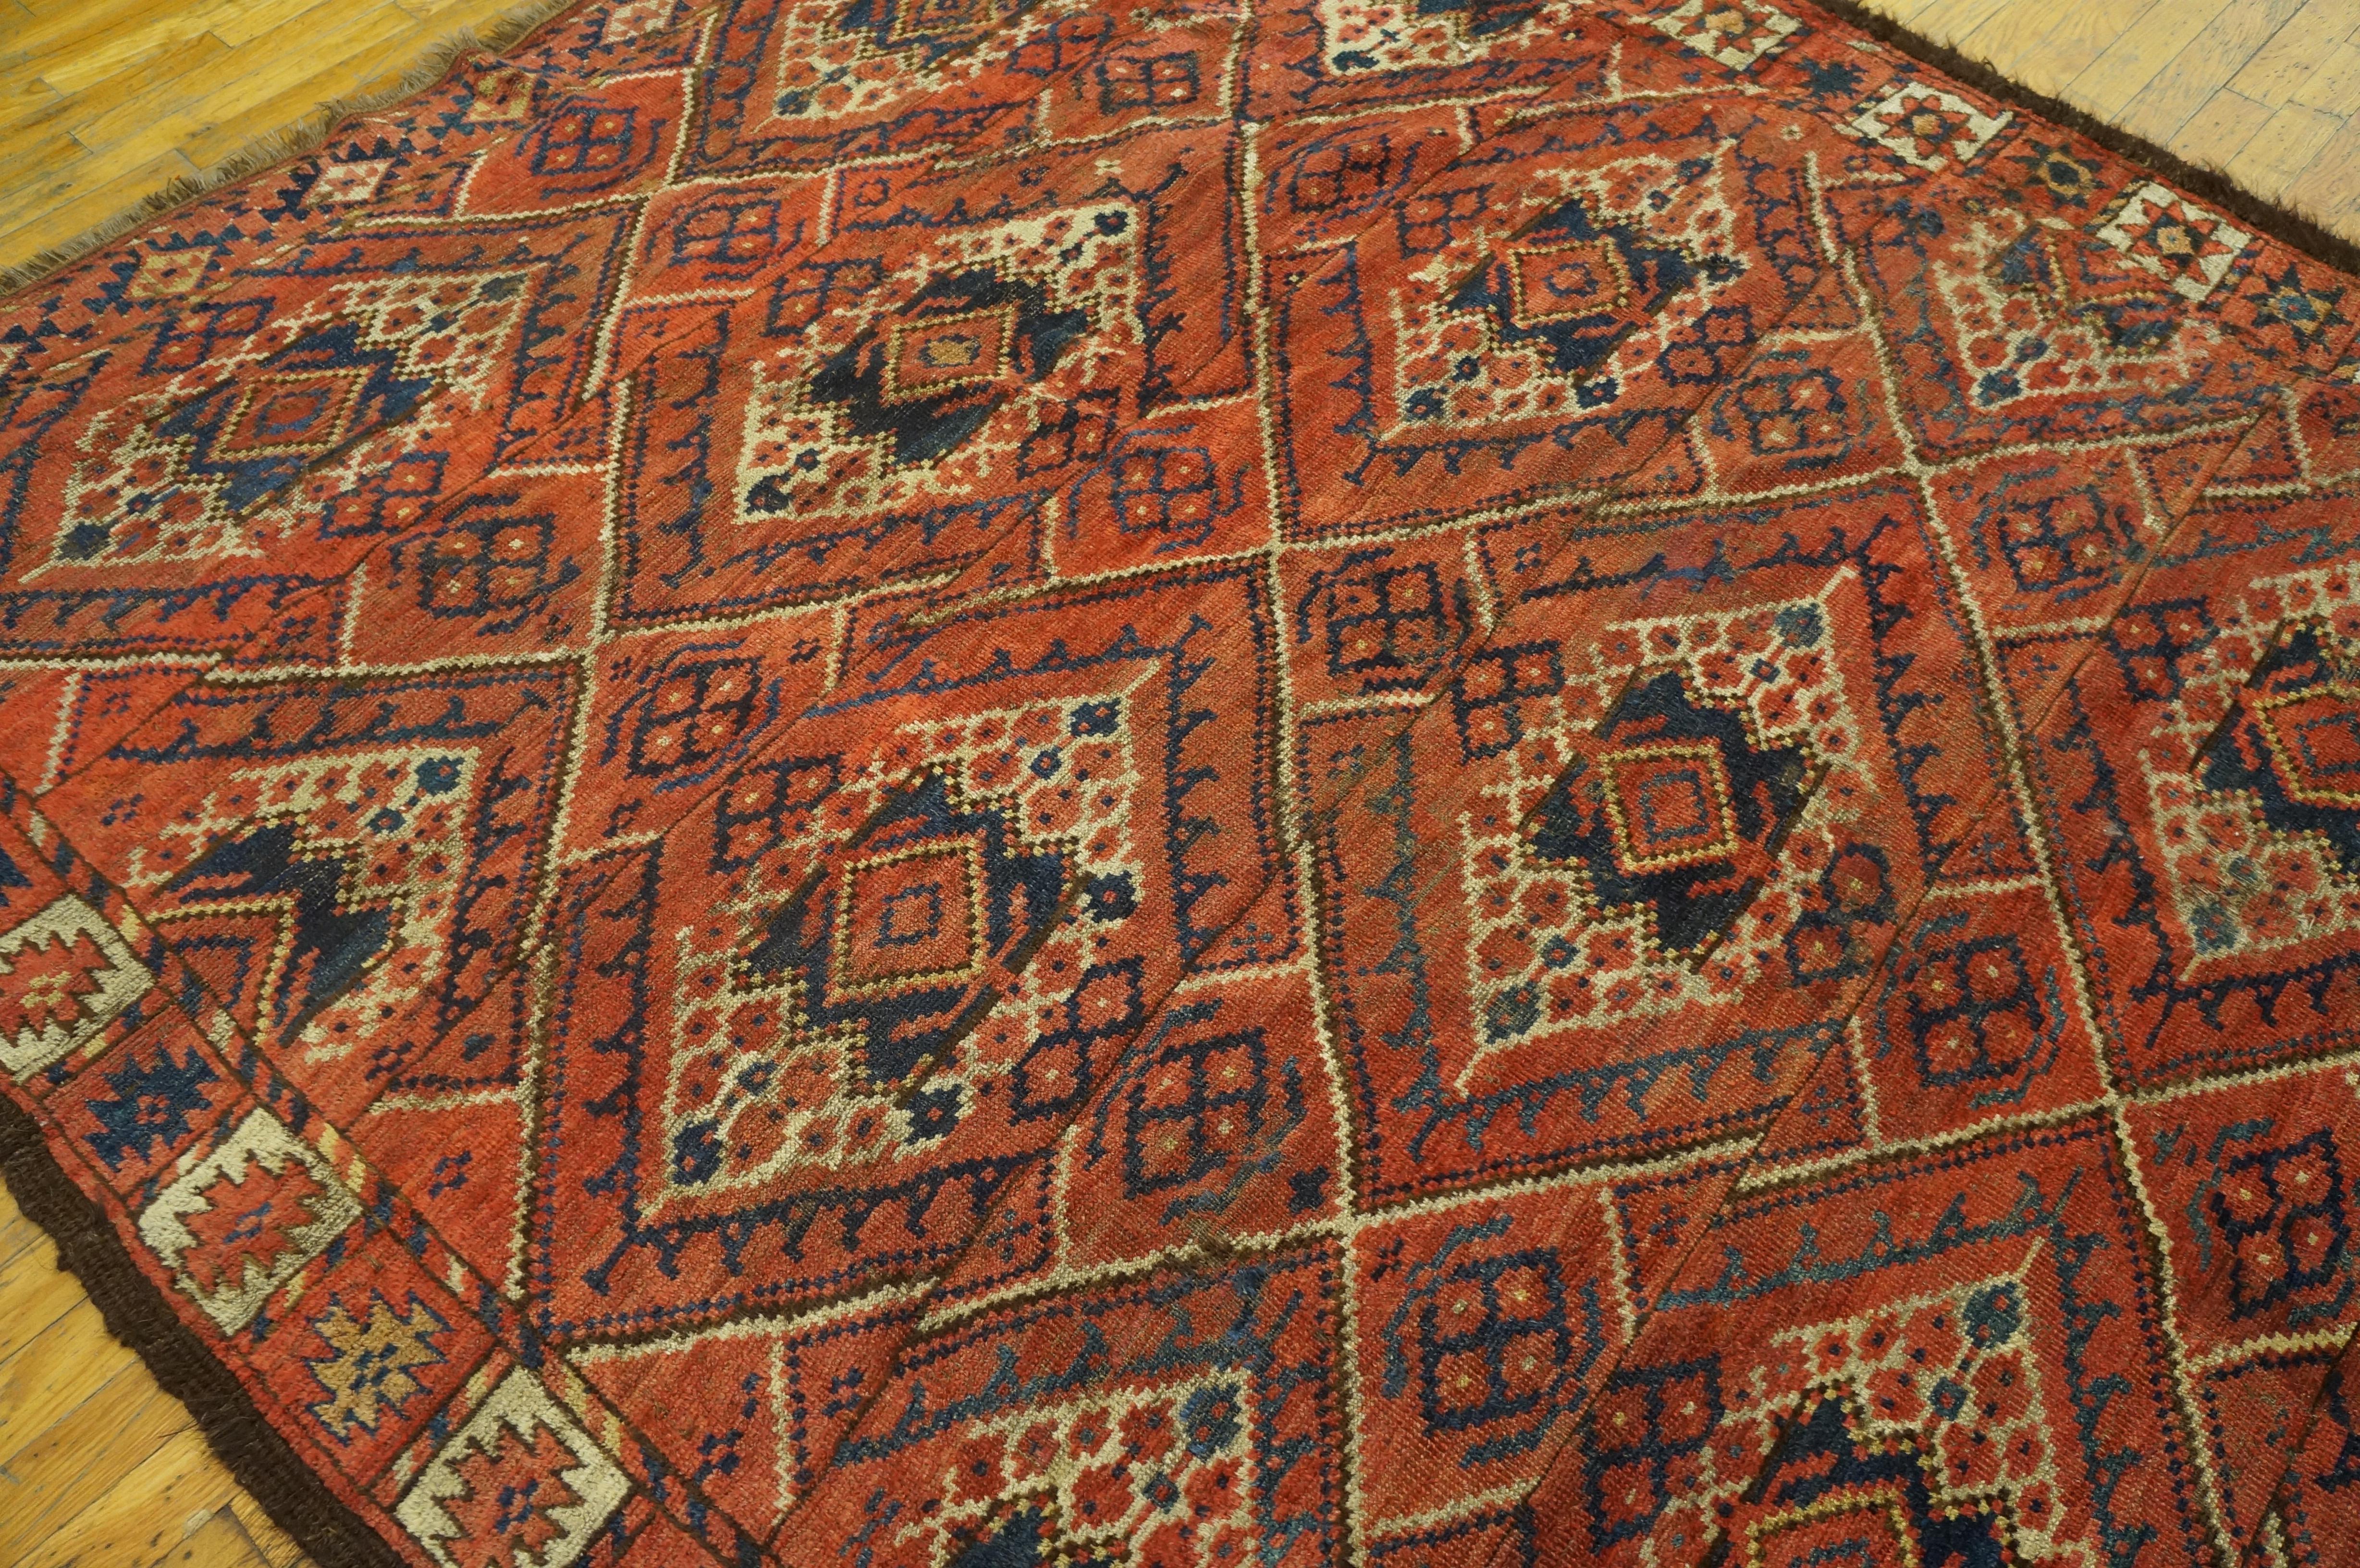 Hand-Knotted 19th Century Central Asian Ersari Carpet ( 6'3